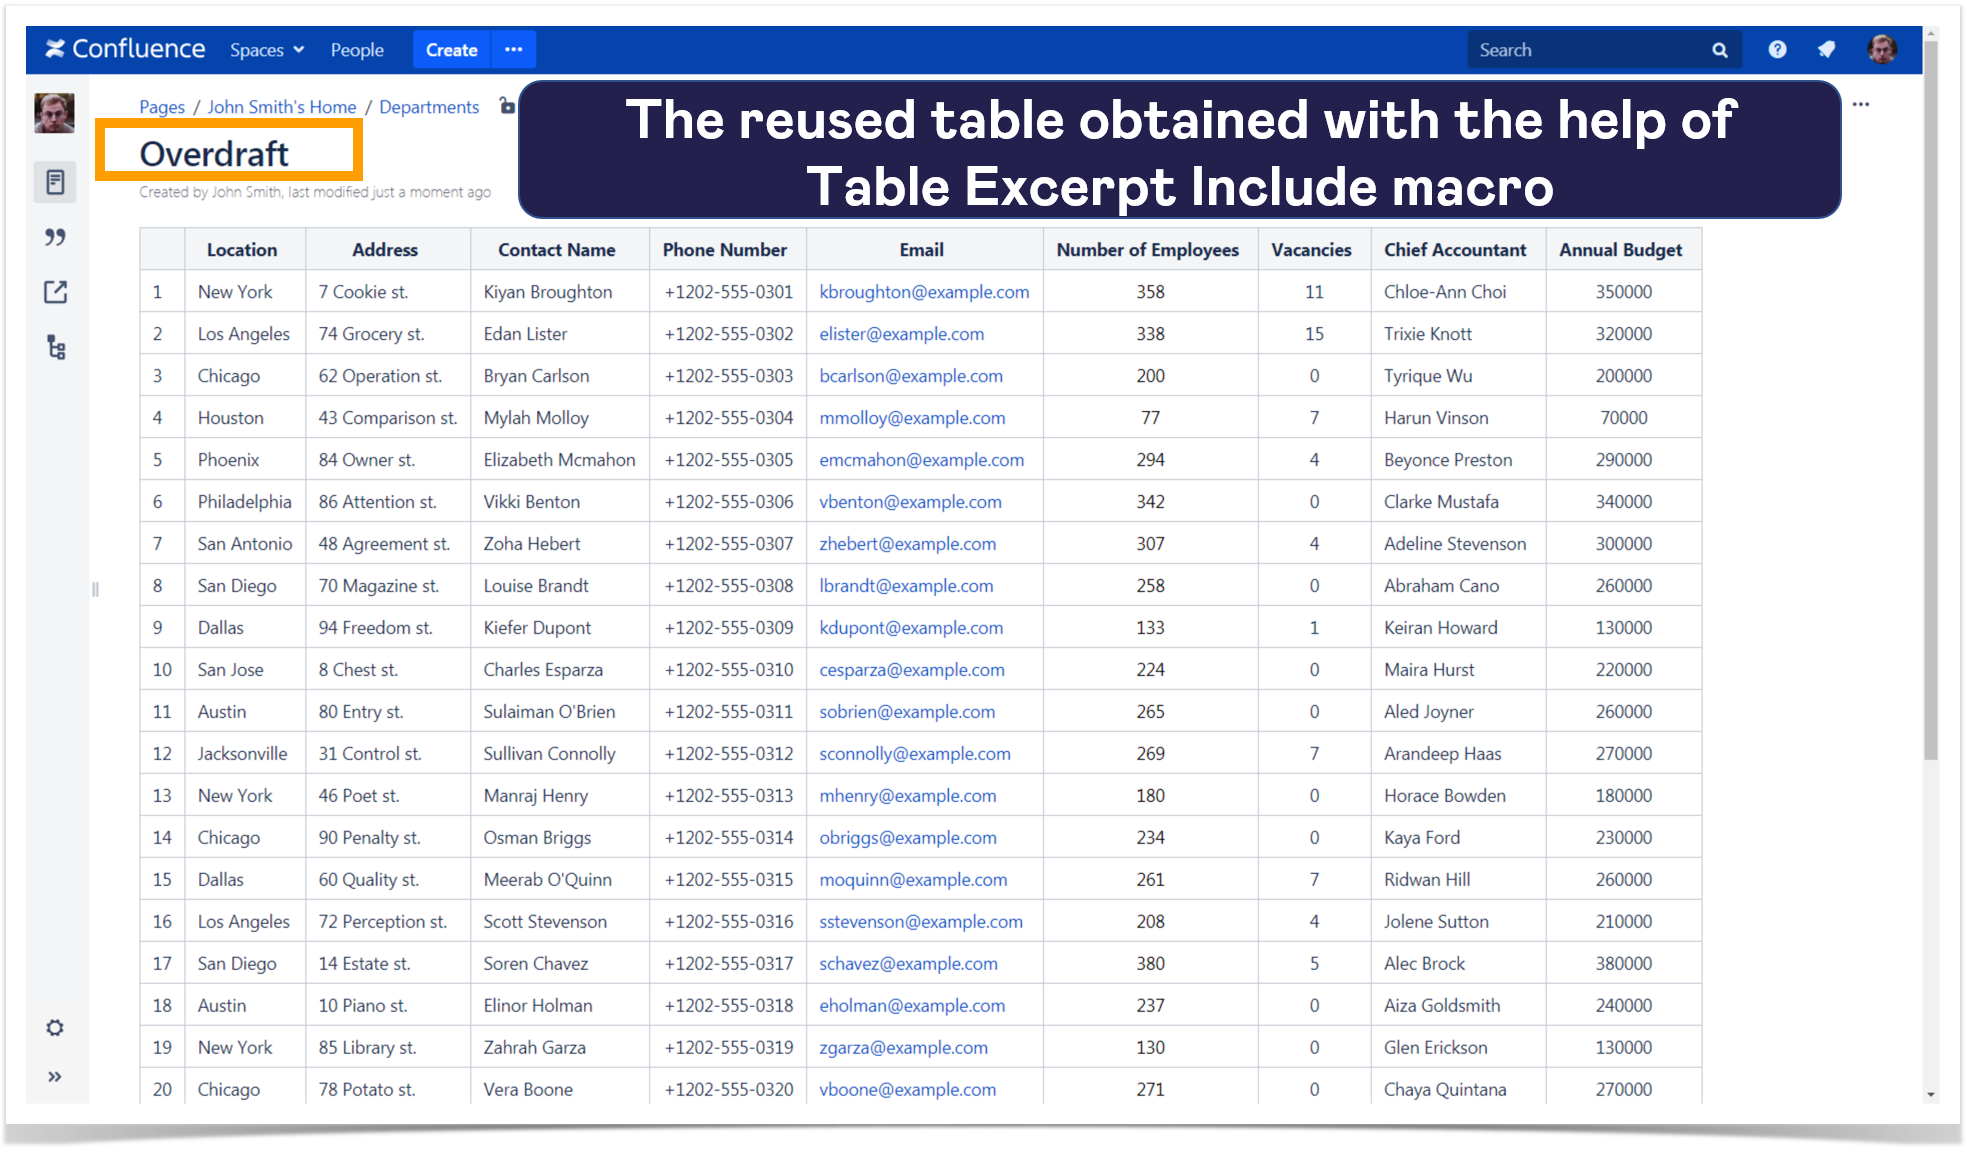 The table generated by the Table Excerpt Include macro